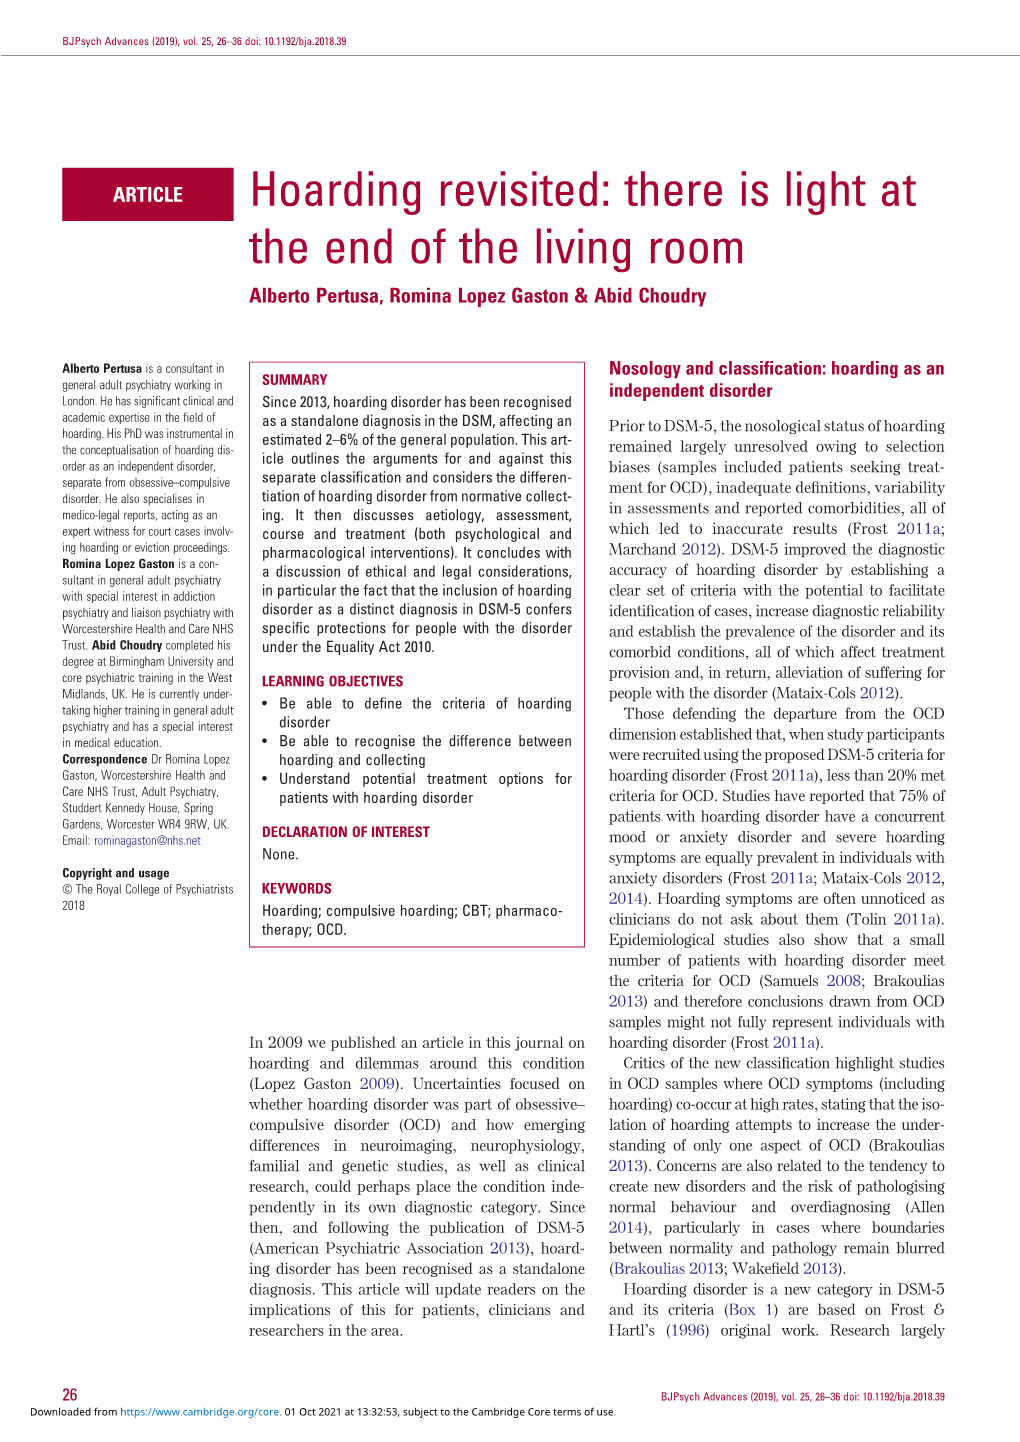 Hoarding Revisited: There Is Light at the End of the Living Room Alberto Pertusa, Romina Lopez Gaston & Abid Choudry